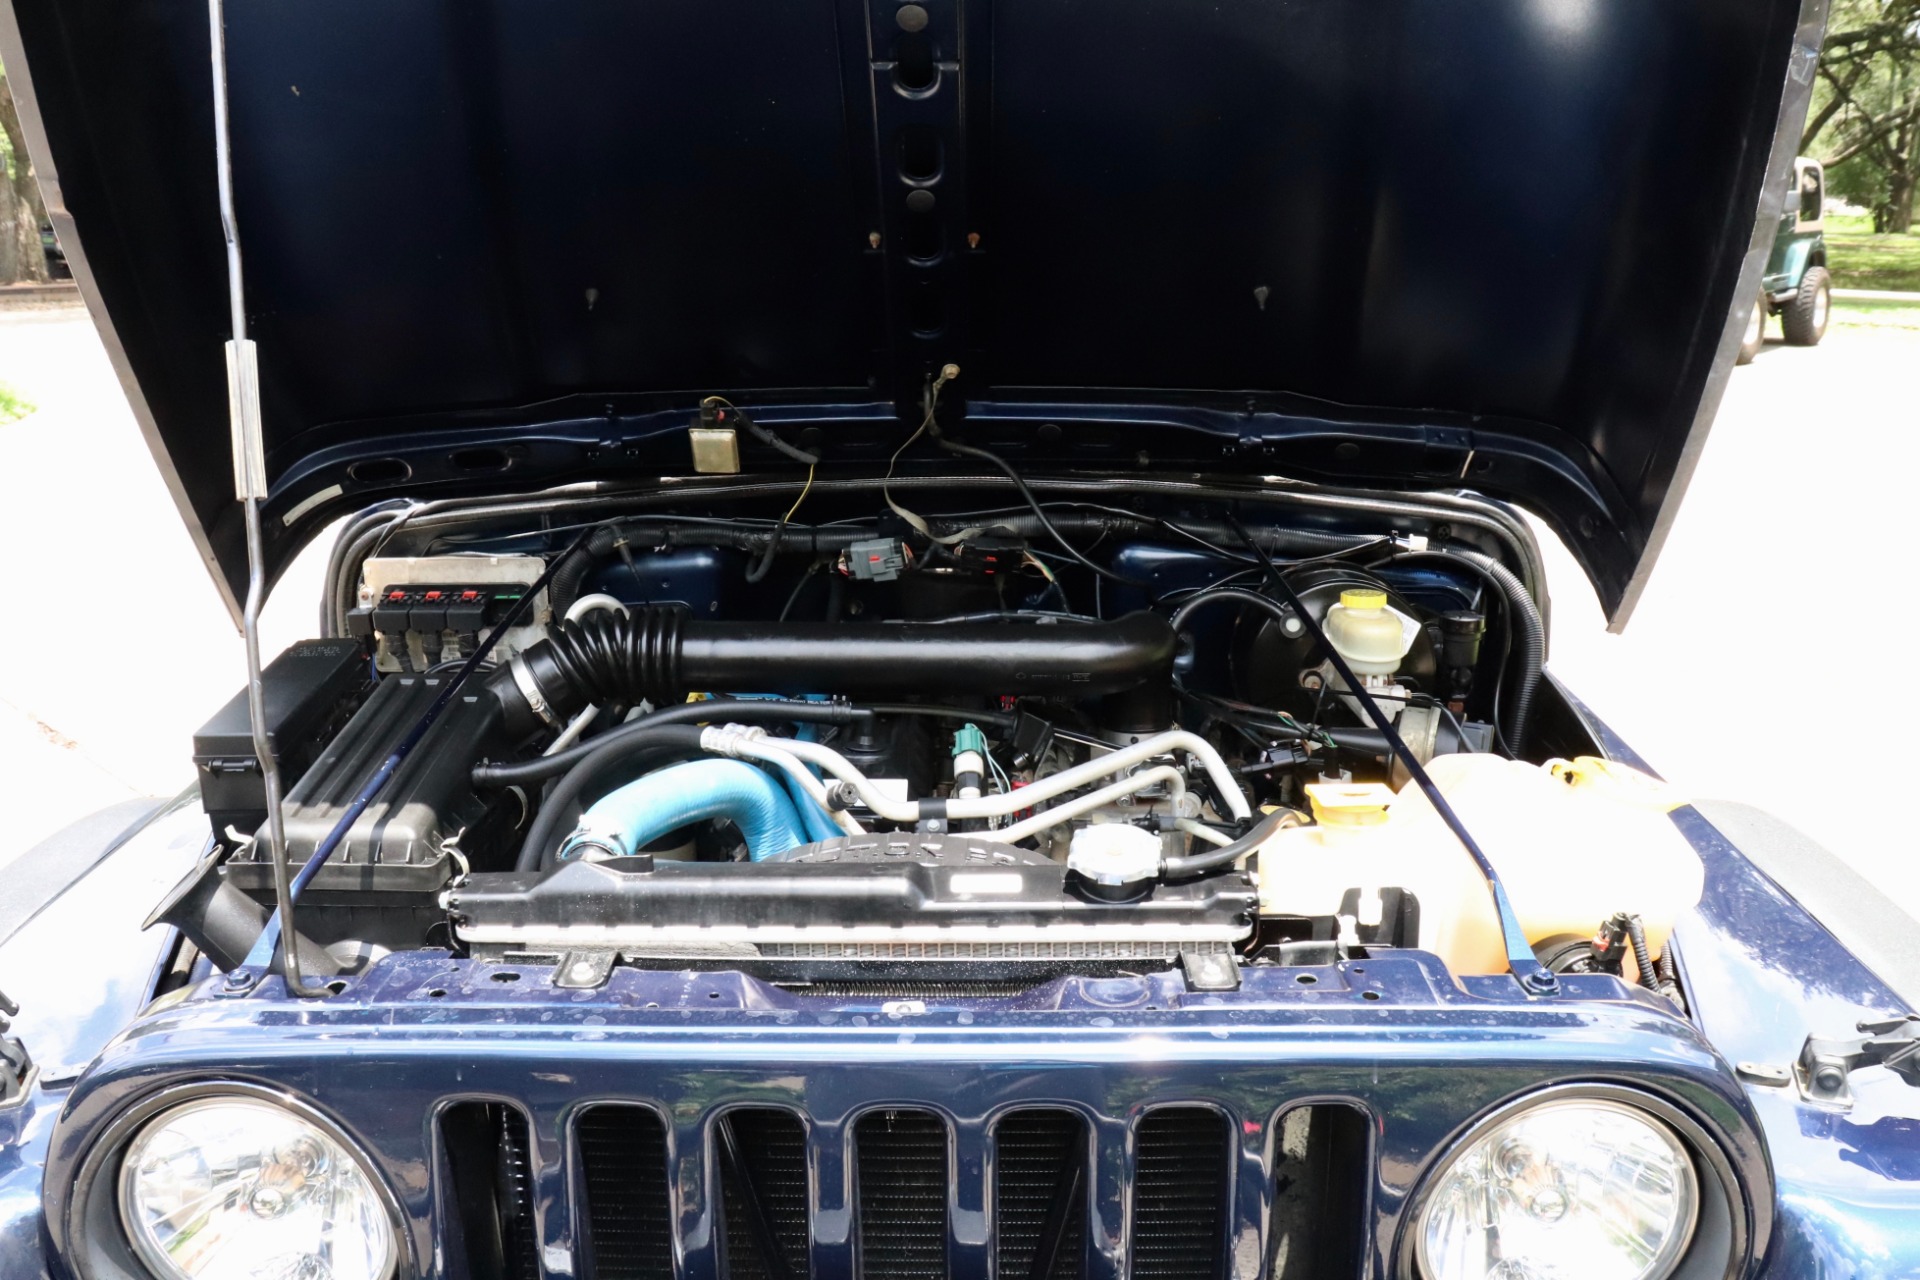 Used-2005-Jeep-Wrangler-Unlimited-2dr-Unlimited